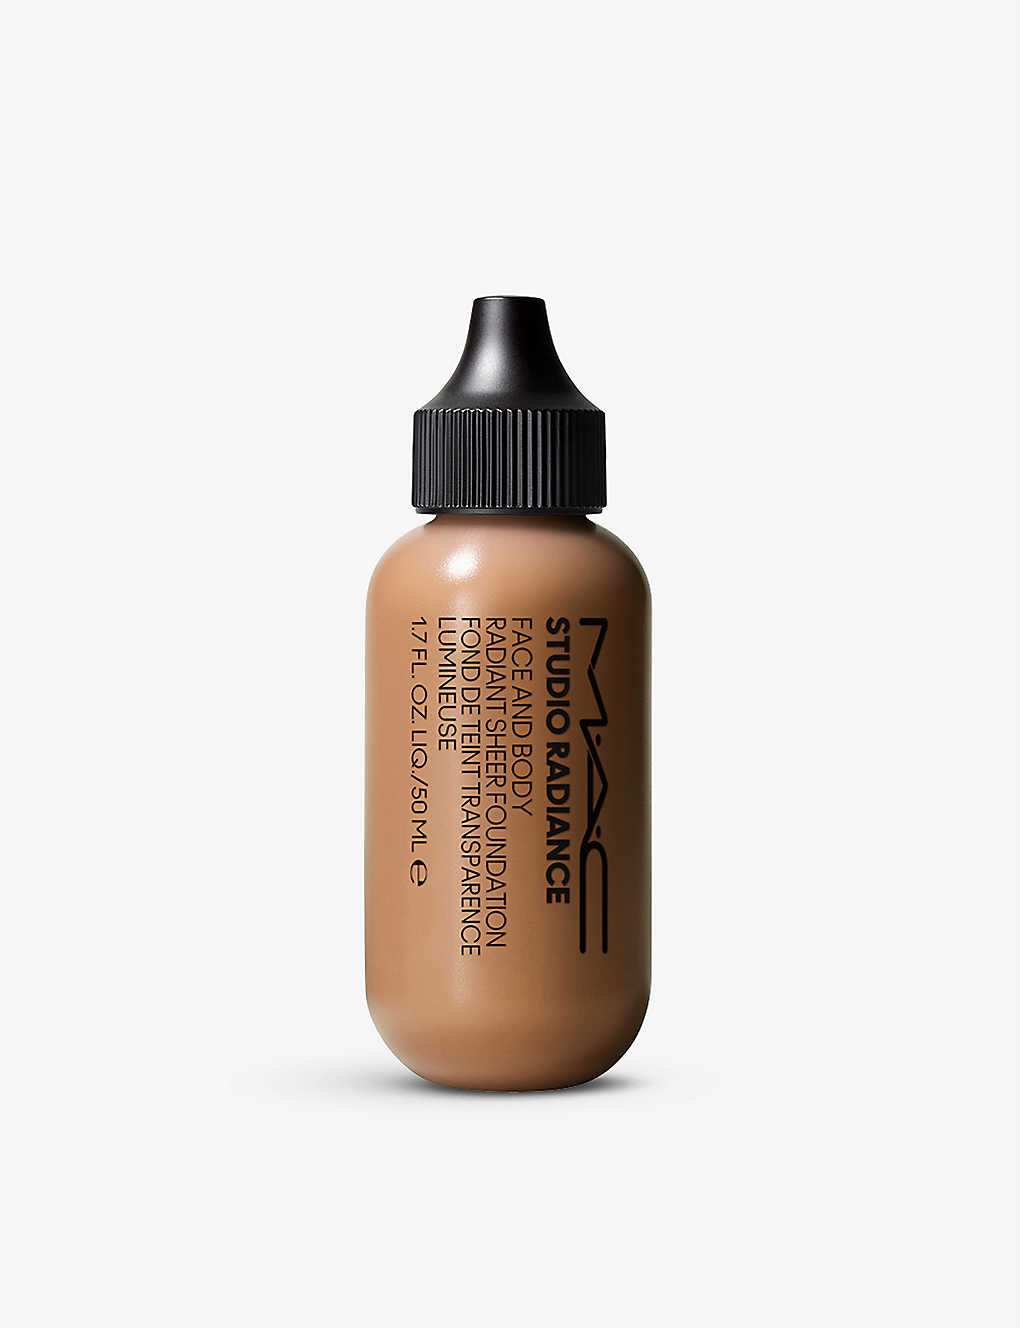 Mac Studio Radiance Face And Body Radiant Sheer Foundation 50ml In N5